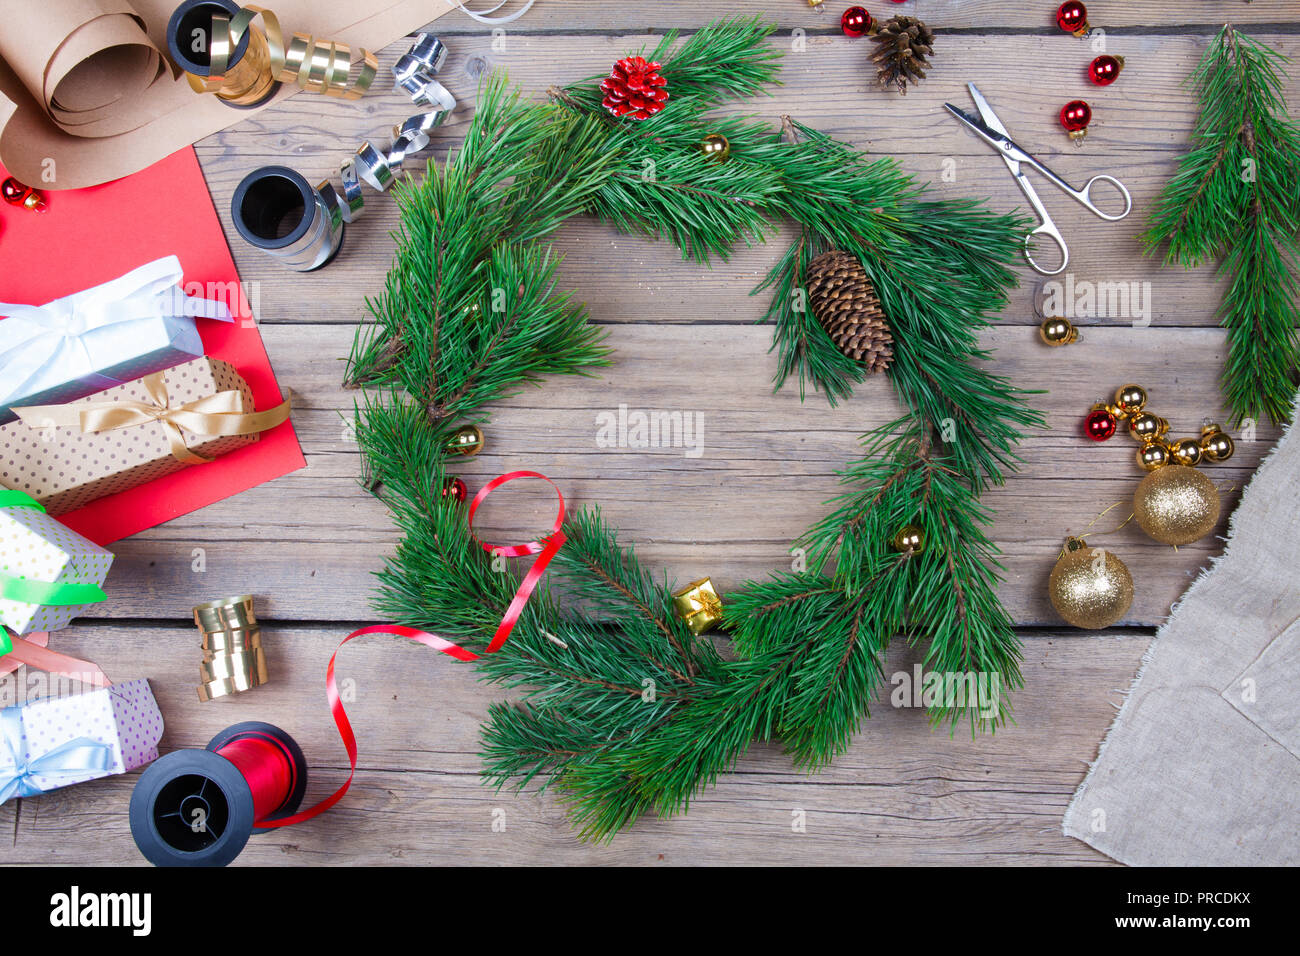 Christmas wreath on a wooden table in a workroom. Top view Stock Photo